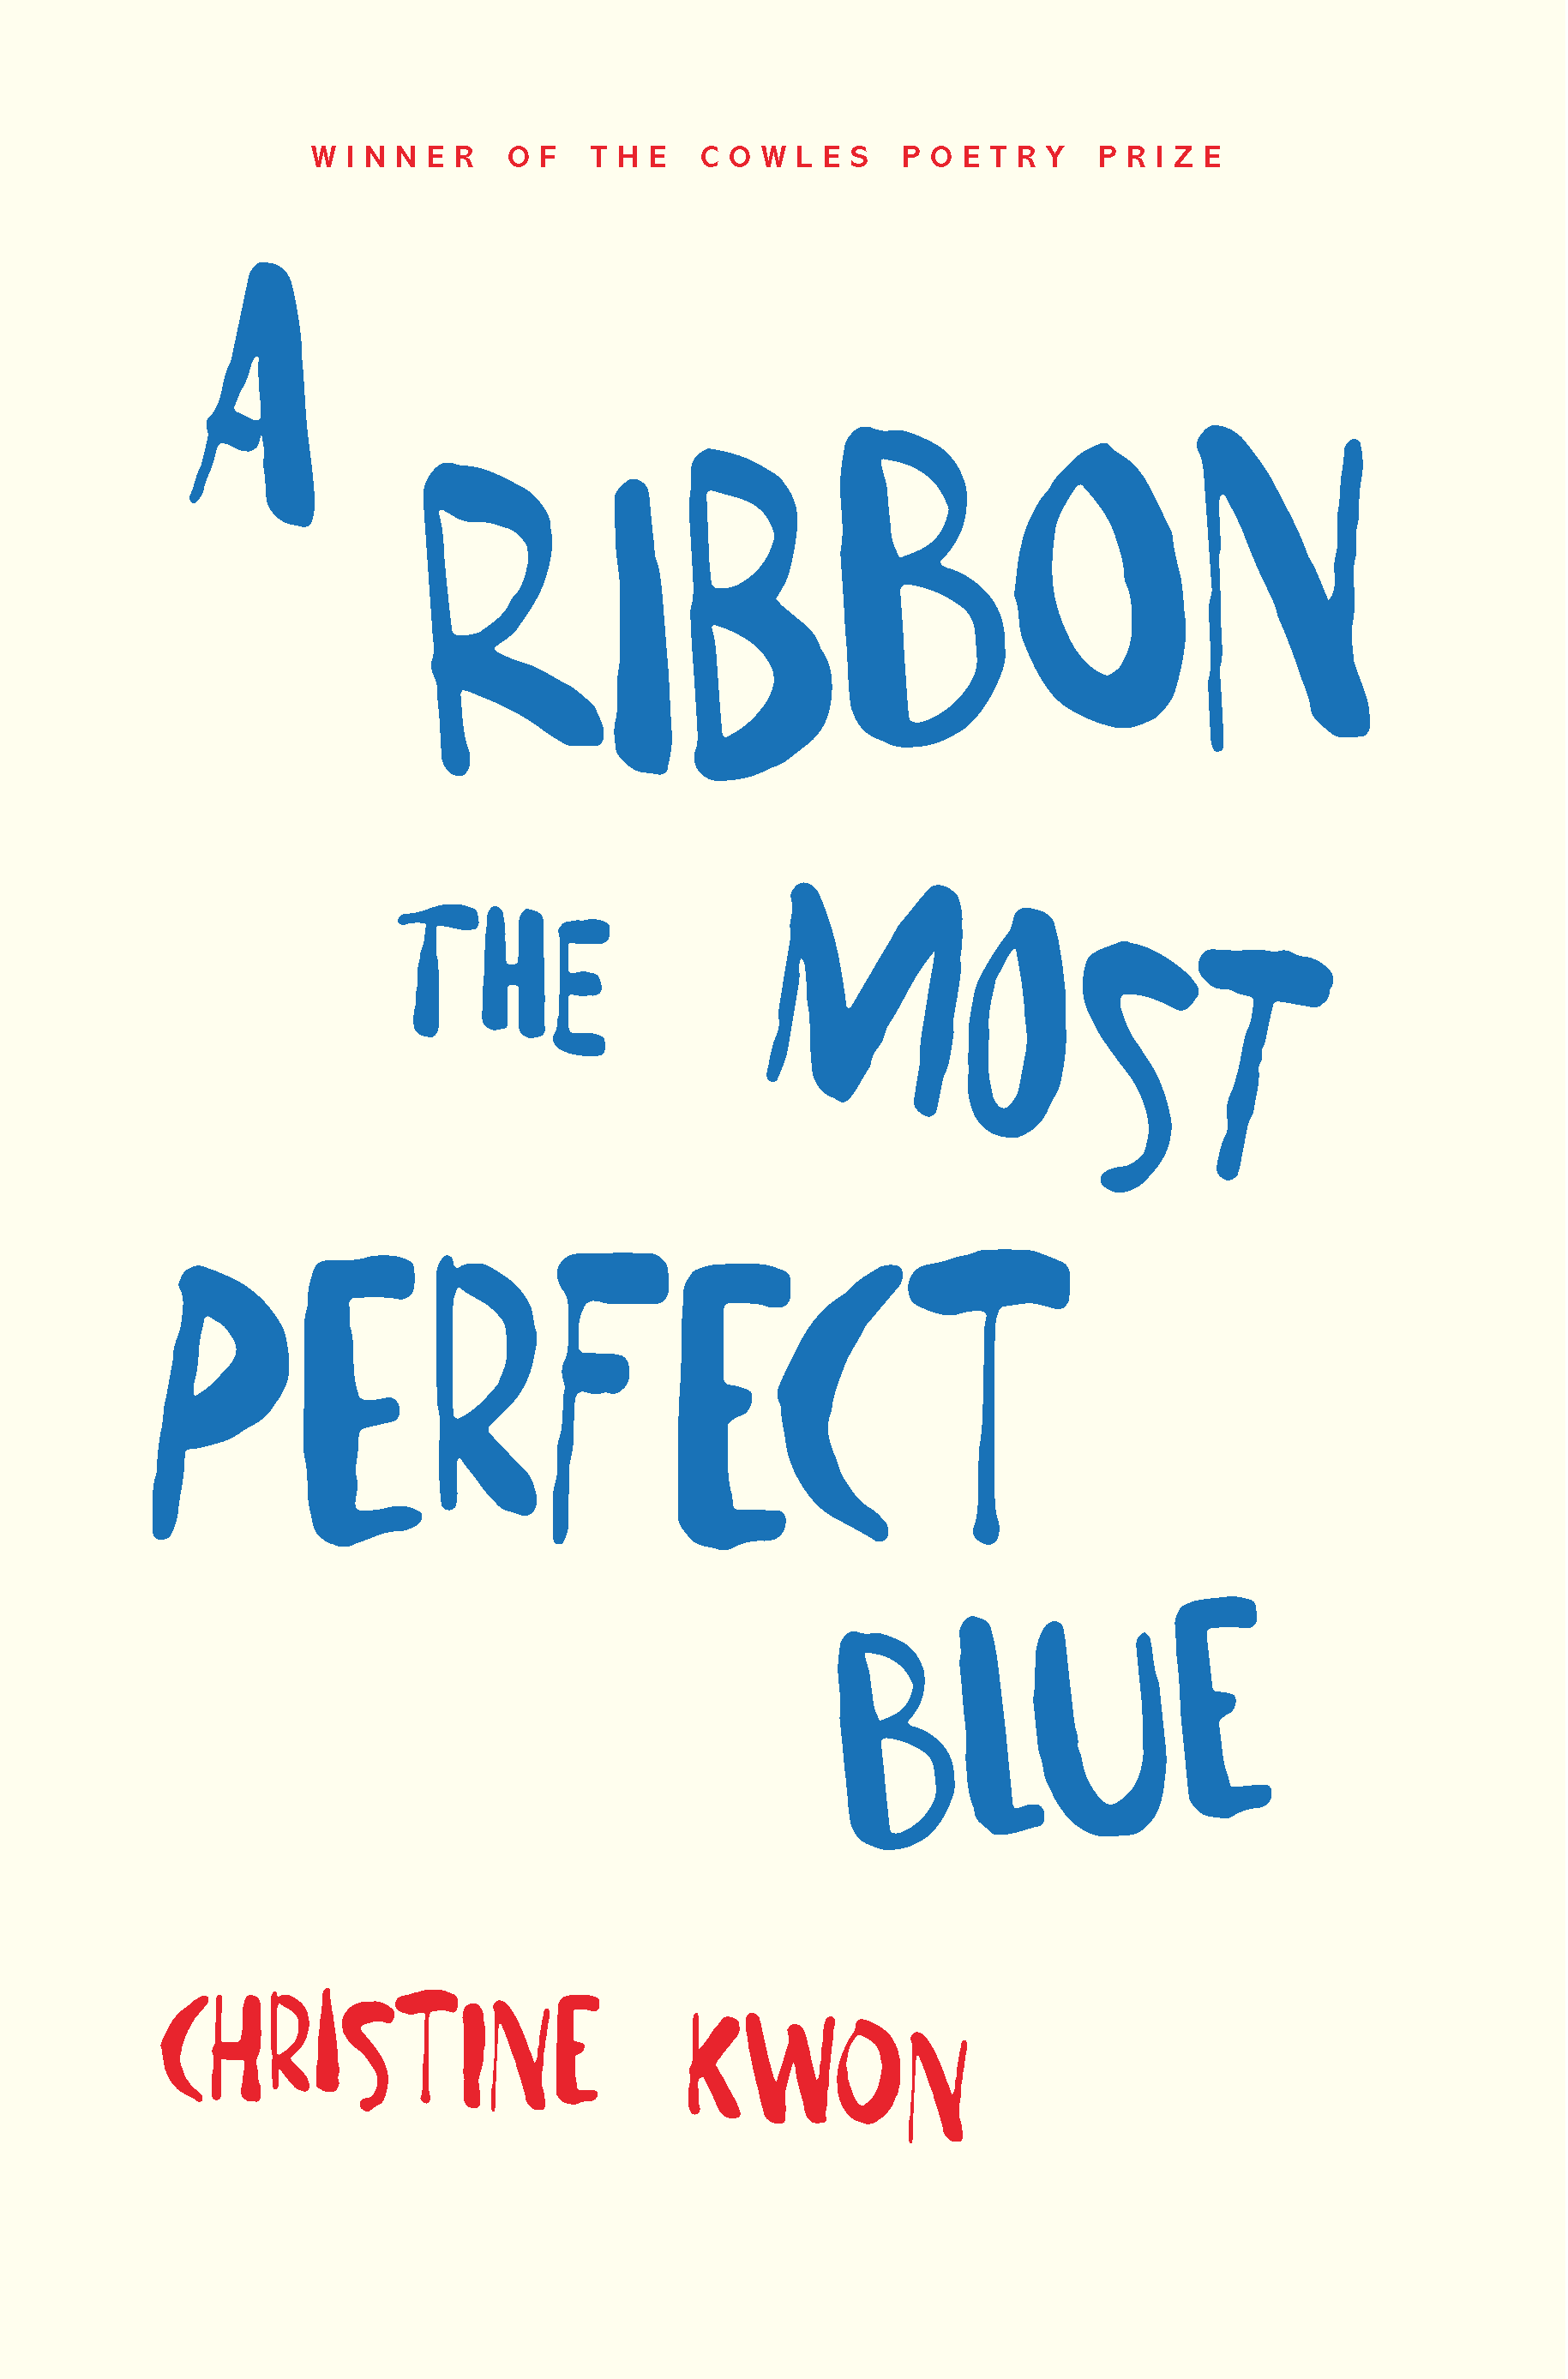 Book cover, all text, small red text says Winner of the Cowles Poetry Prize, most of the cover features bright blue, uneven letters reading A RIBBON THE MOST PERFECT BLUE. The author's name, Christine Kwon, appears in red at the bottom of the page.